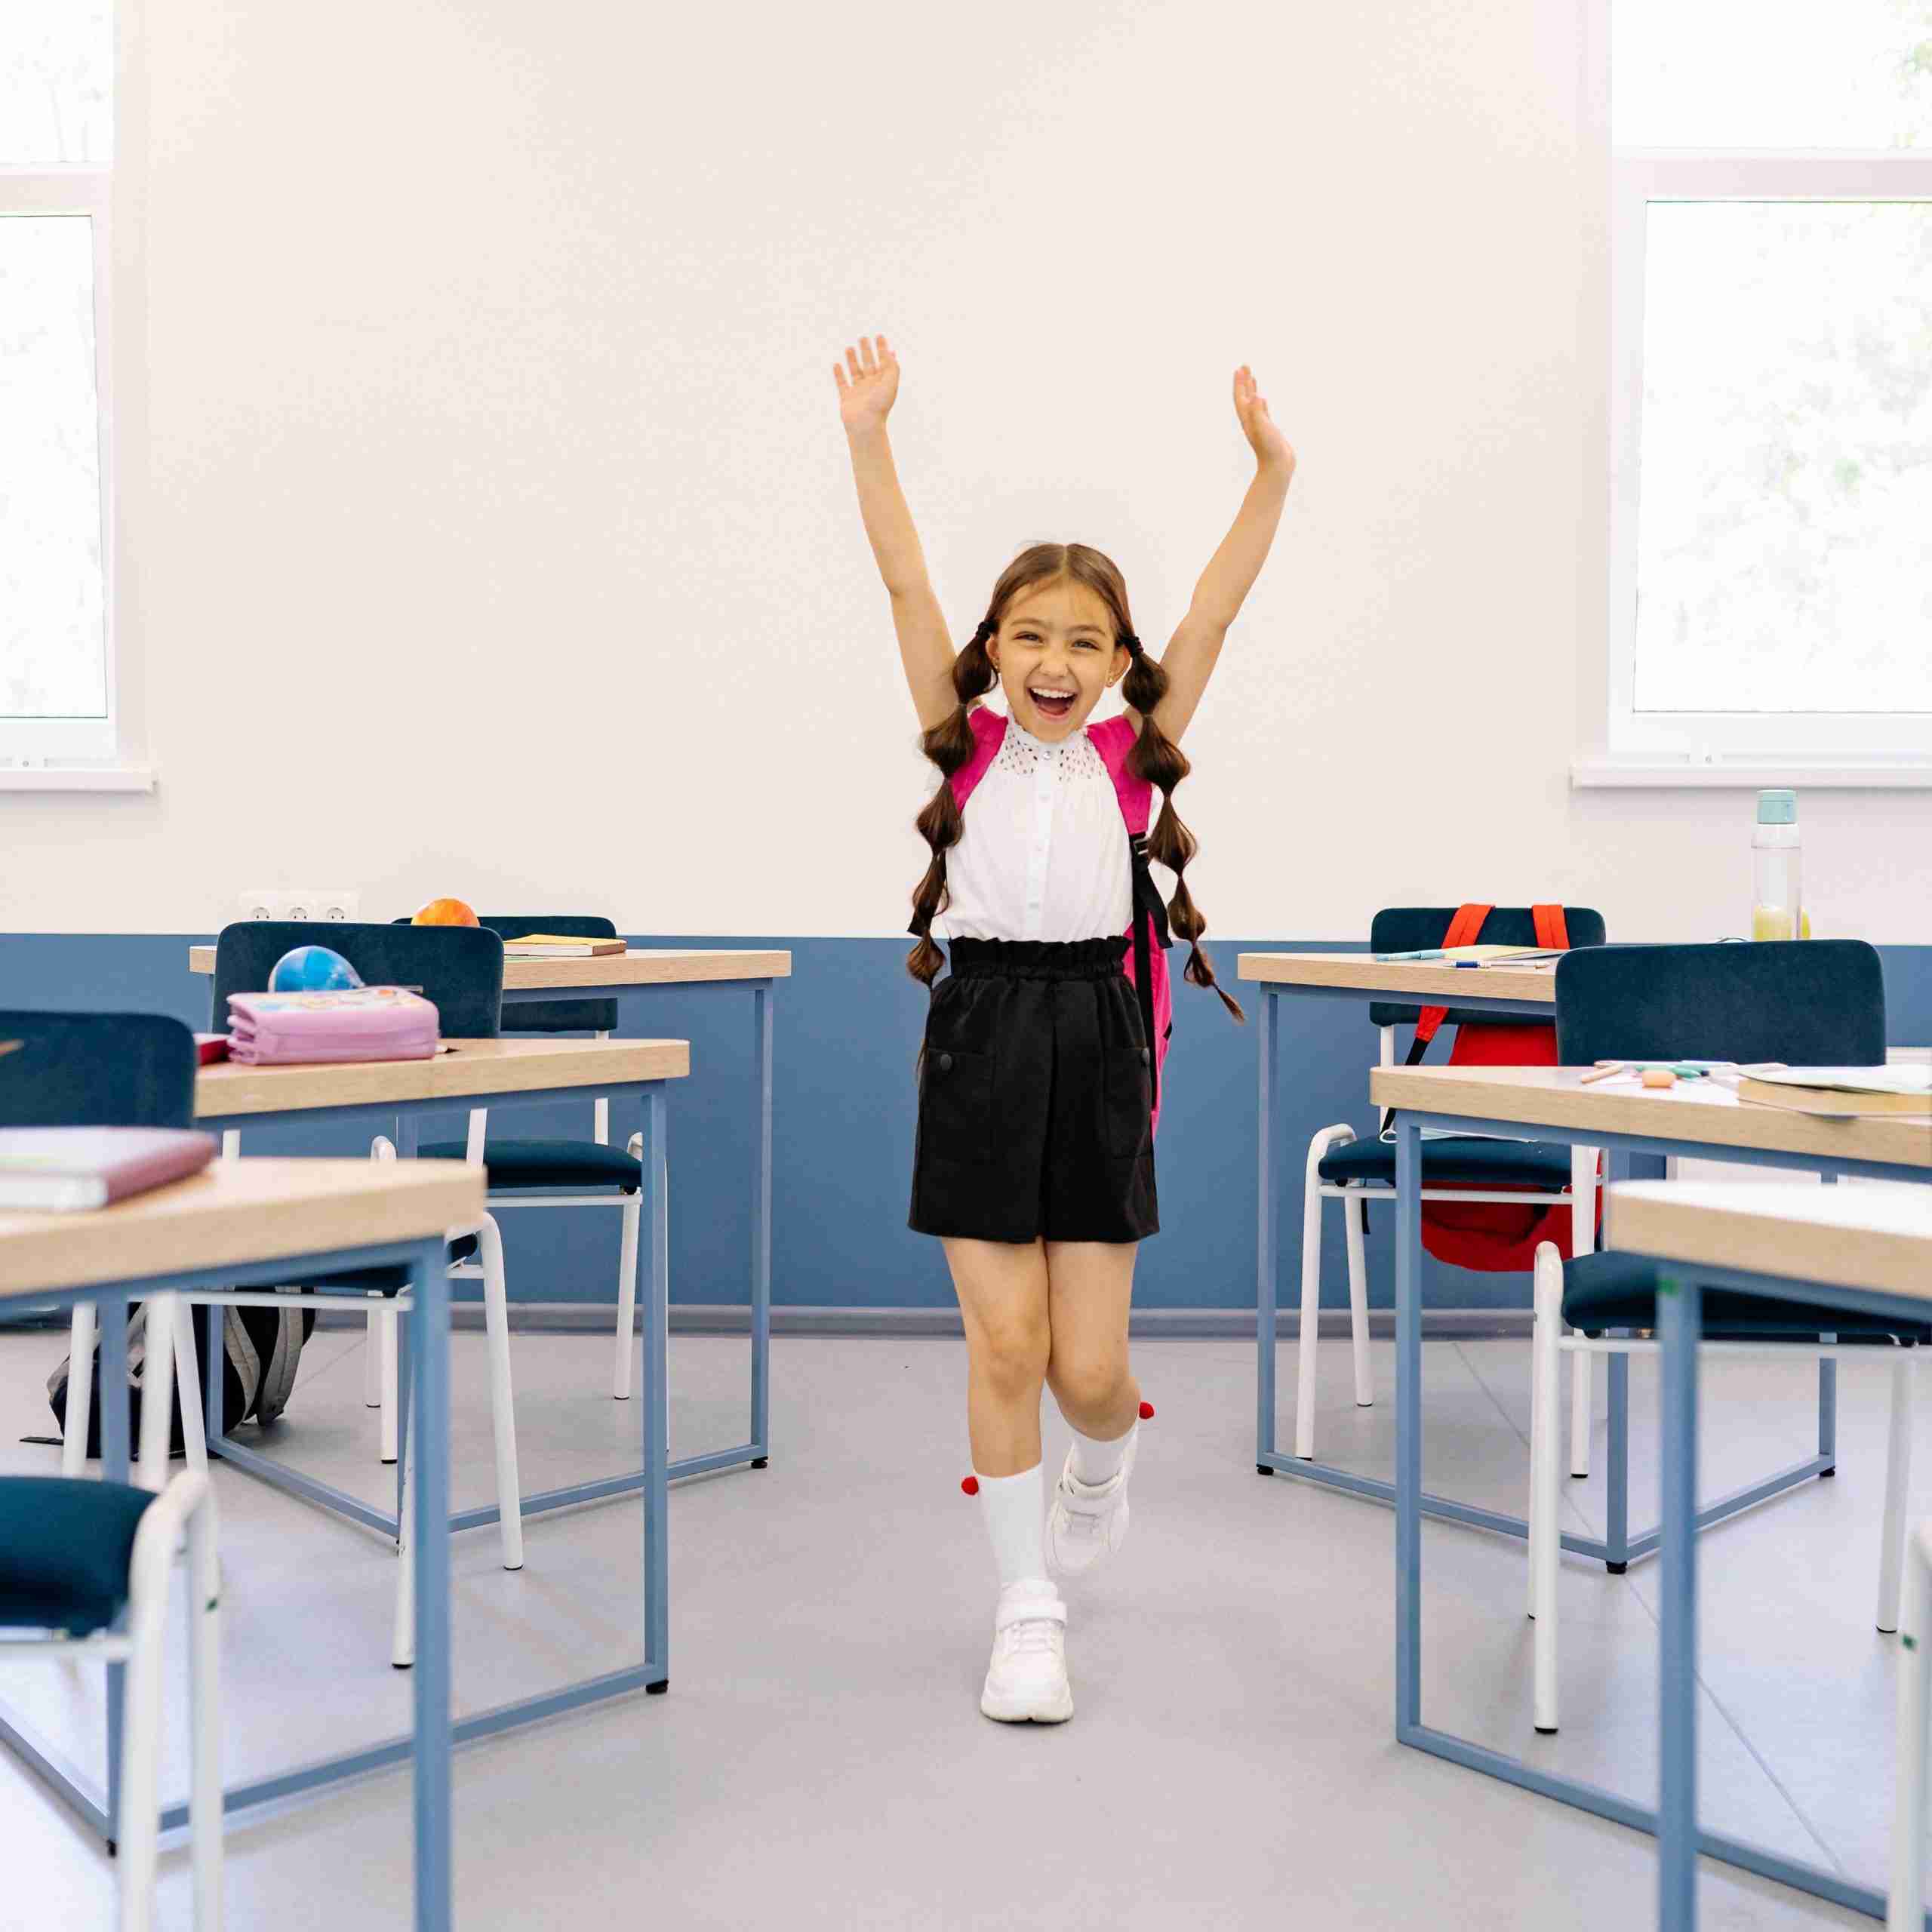 A child who is excited in a classroom setting